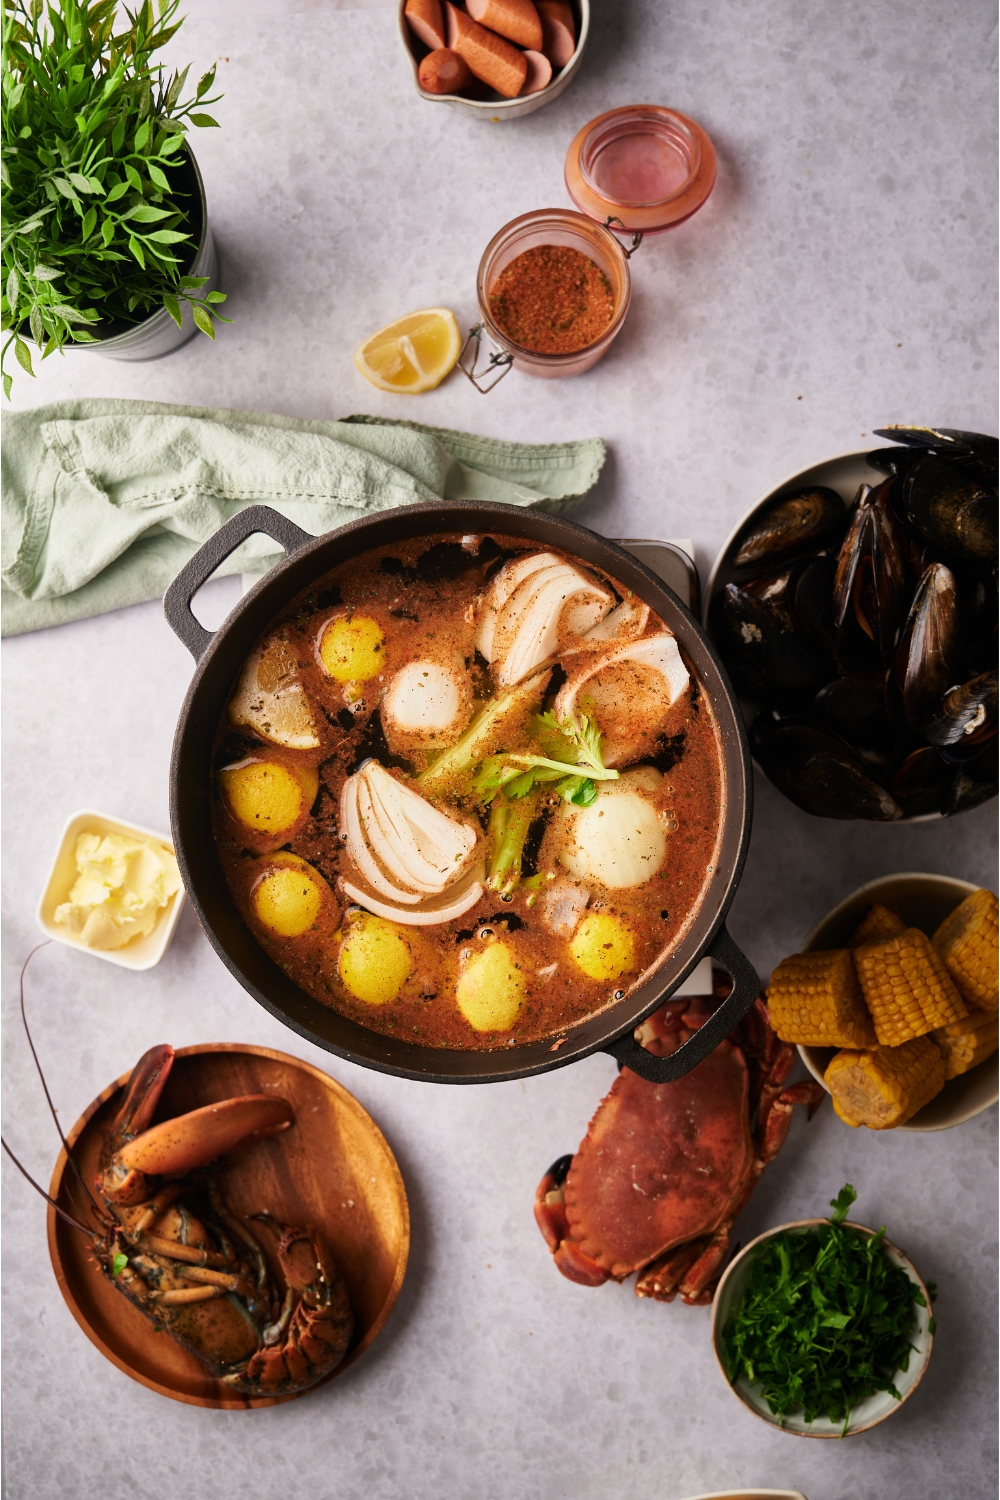 Black Dutch oven filled with onions, celery, potatoes and lemon wedges in a brown broth. Surrounding the Dutch oven is an assortment of ingredients including lobster, crab, clams, sausages, corn, fresh herbs, and spices.